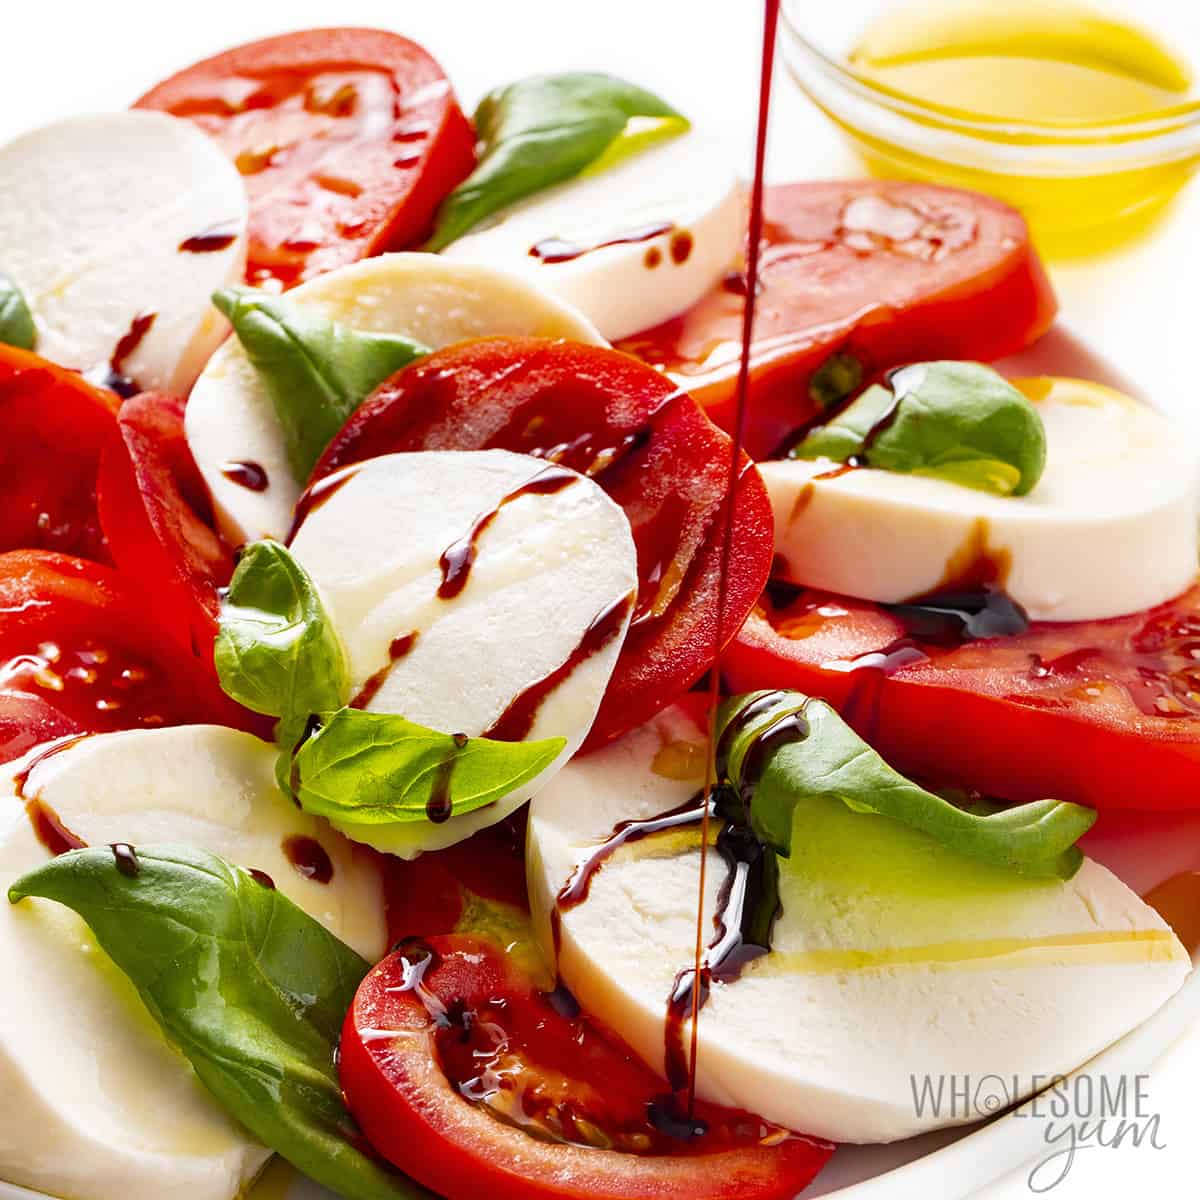 Caprese salad dressing drizzled over salad ingredients.